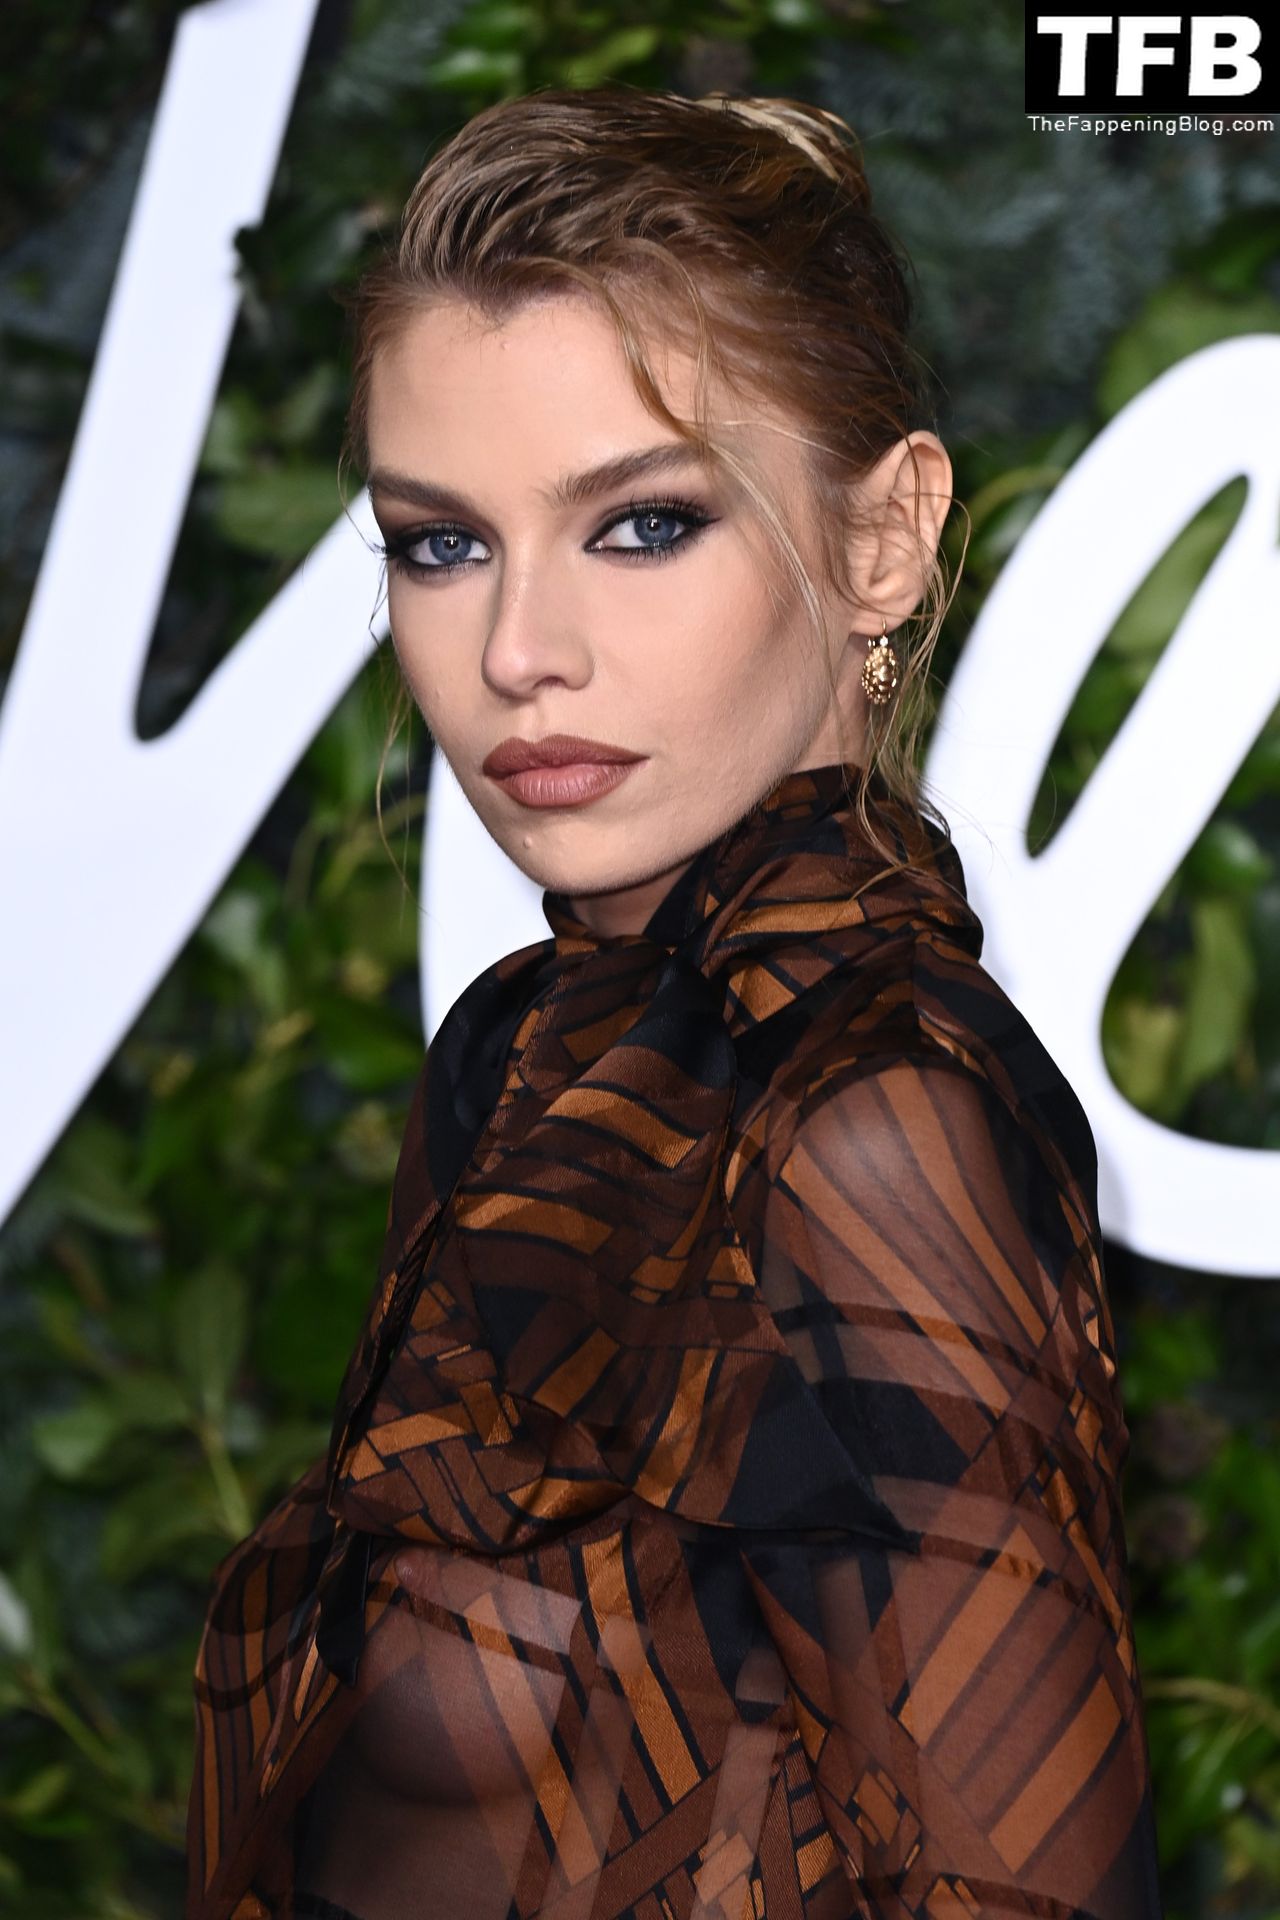 Stella-Maxwell-See-Through-Nude-The-Fappening-Blog-81.jpg